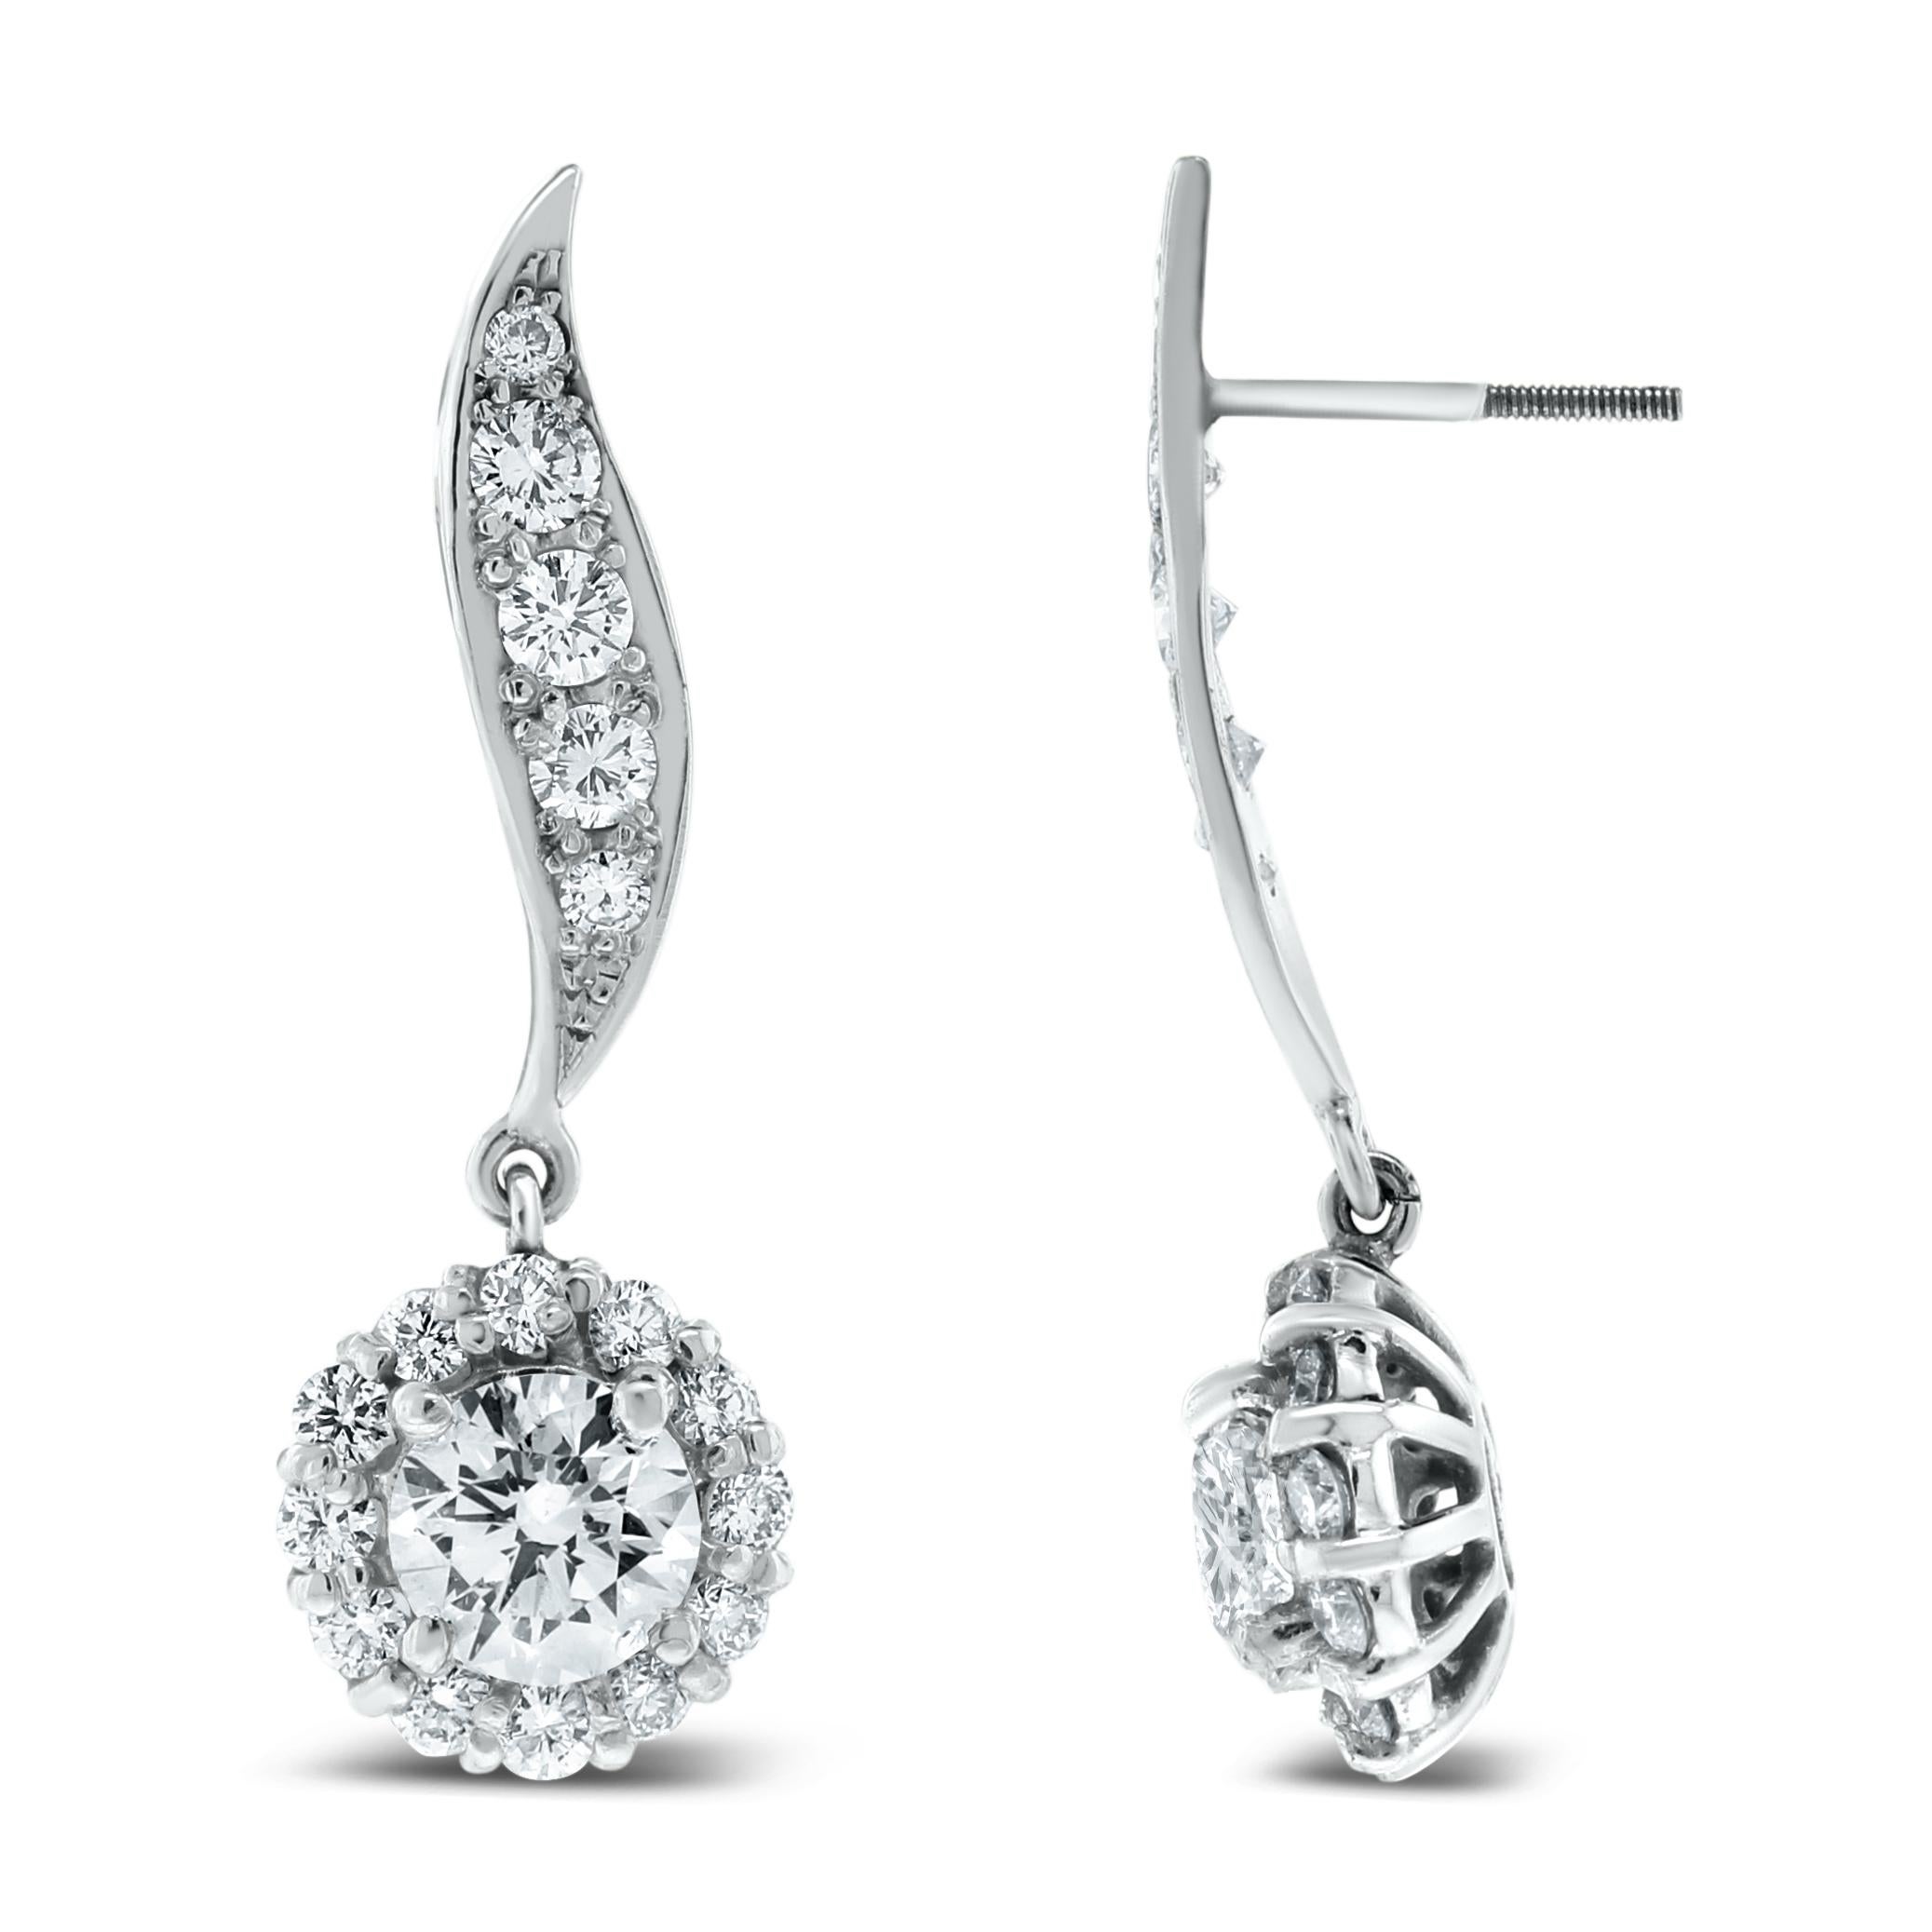 Beauvince Leela Leaf Drop Earrings, '3.50 Ct Diamonds', in White Gold In New Condition For Sale In New York, NY